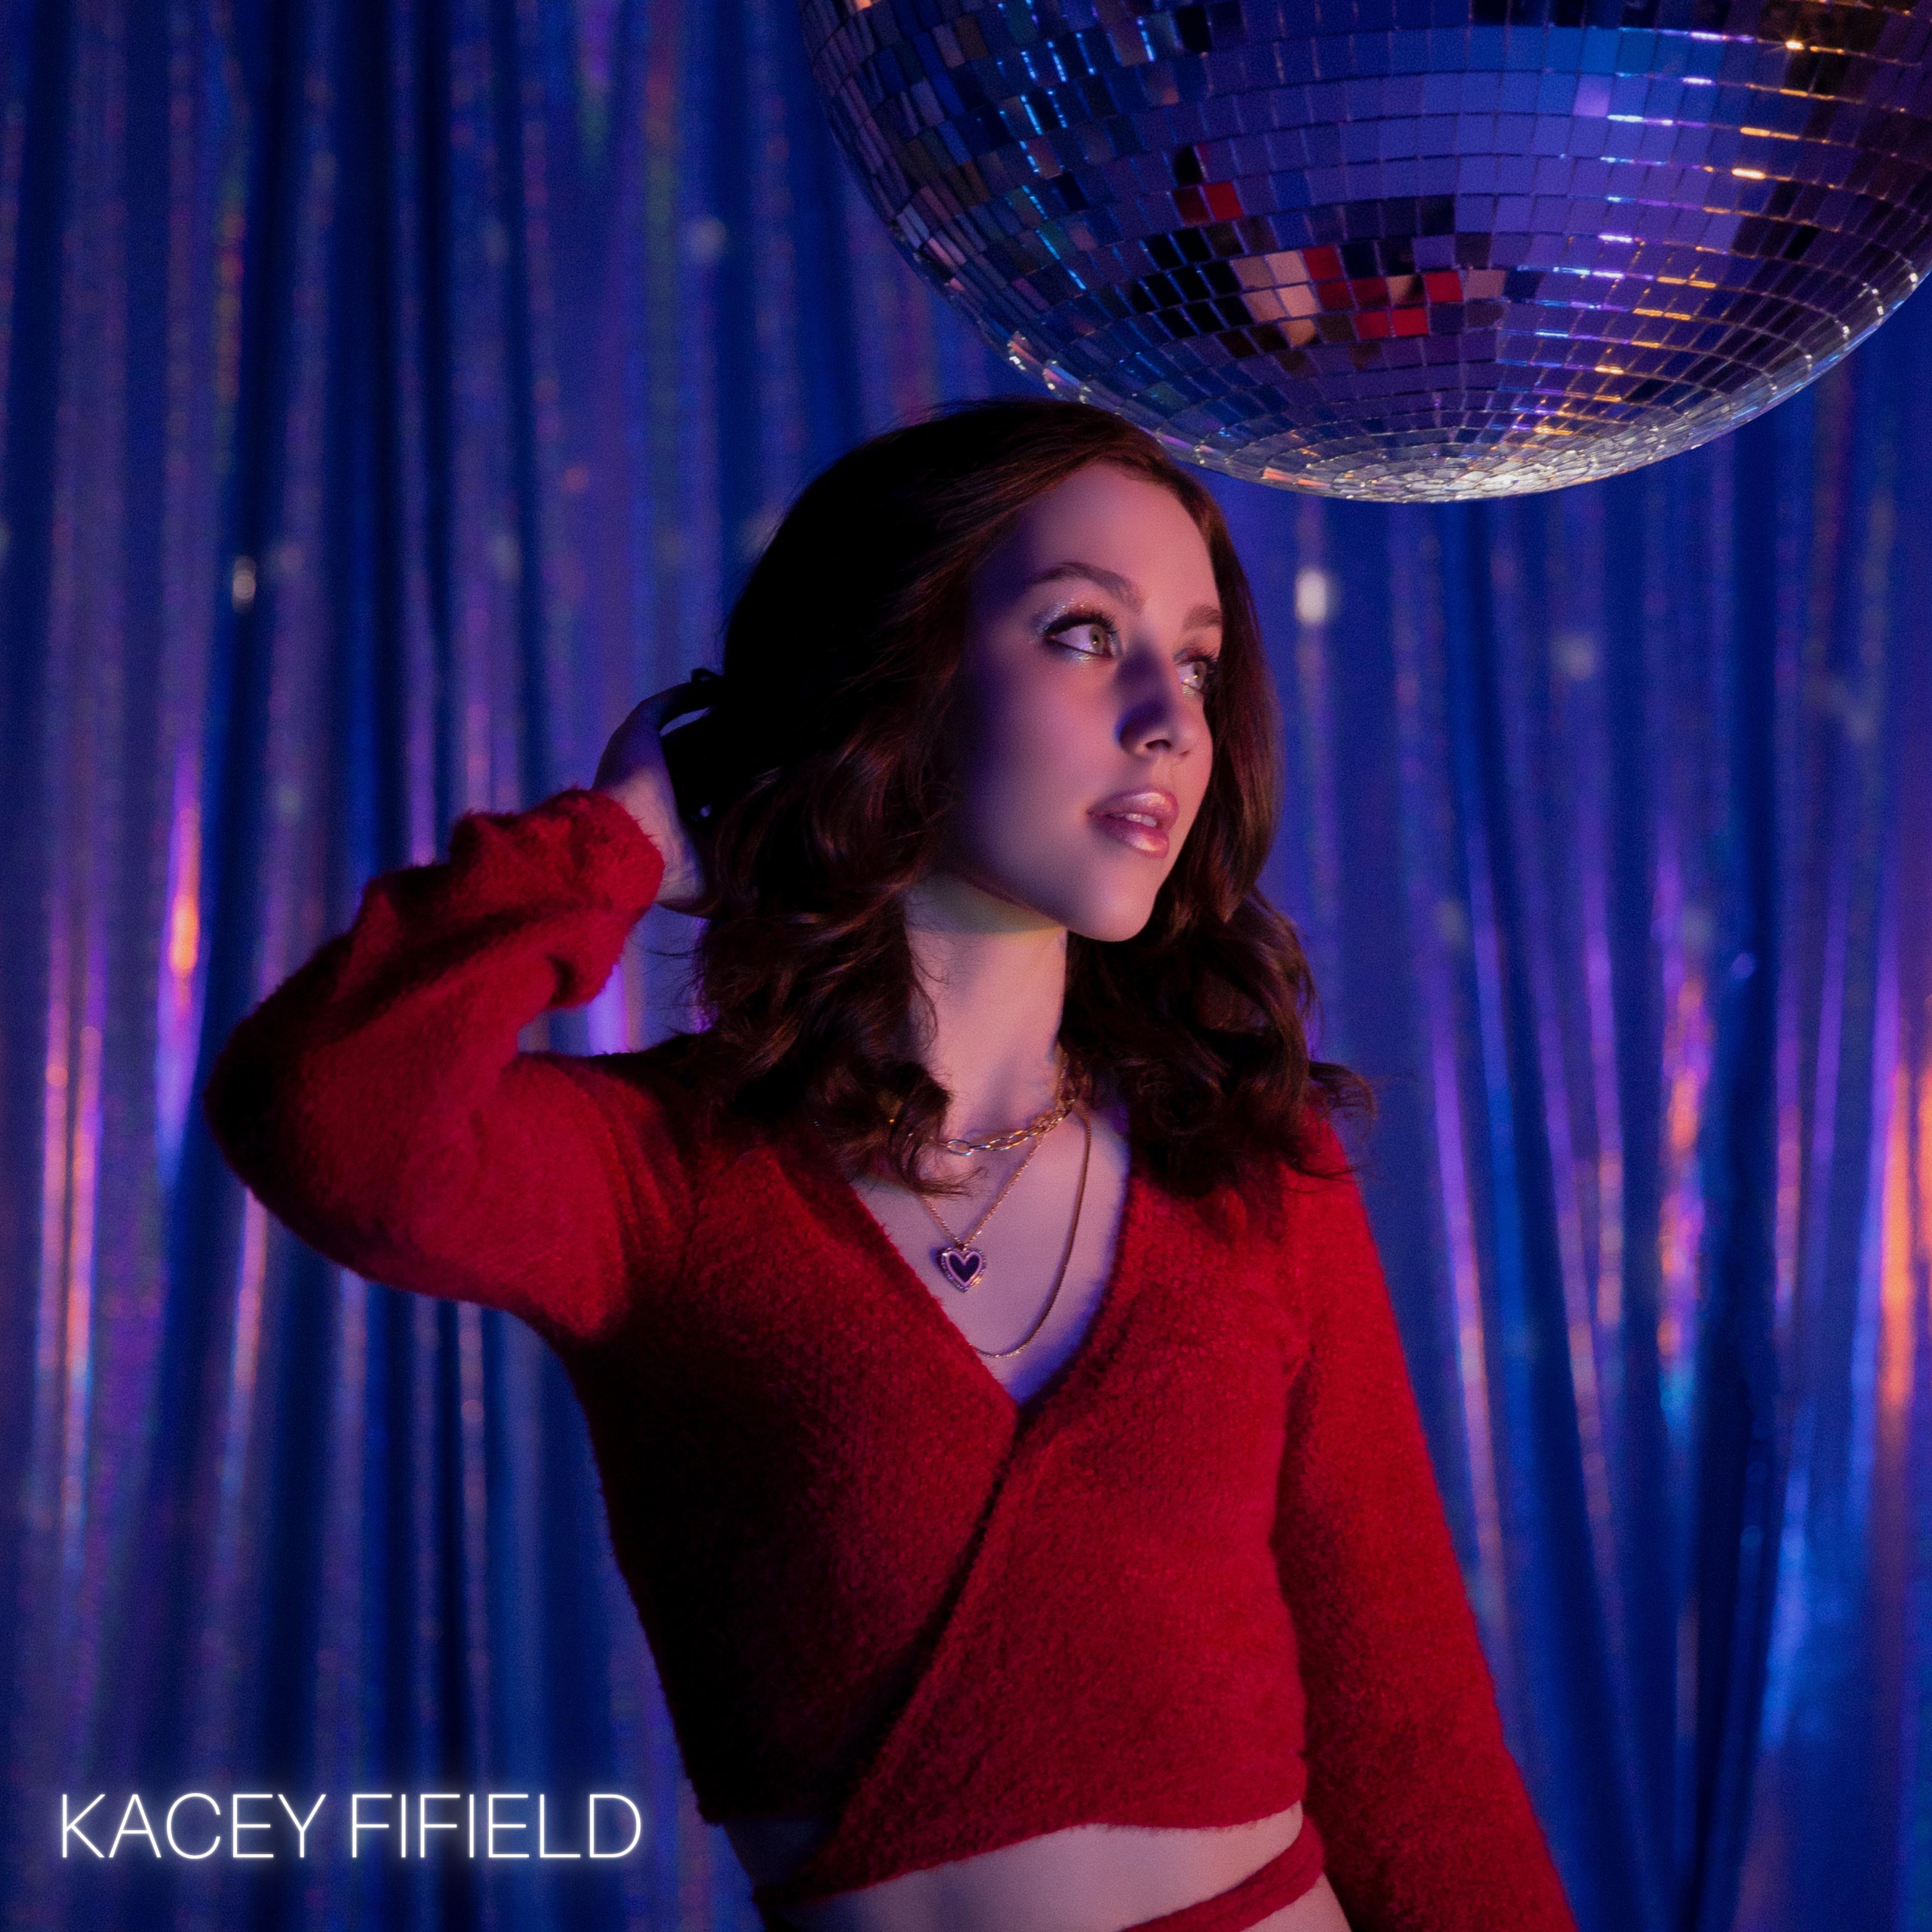 Interview With Kacey Fifield